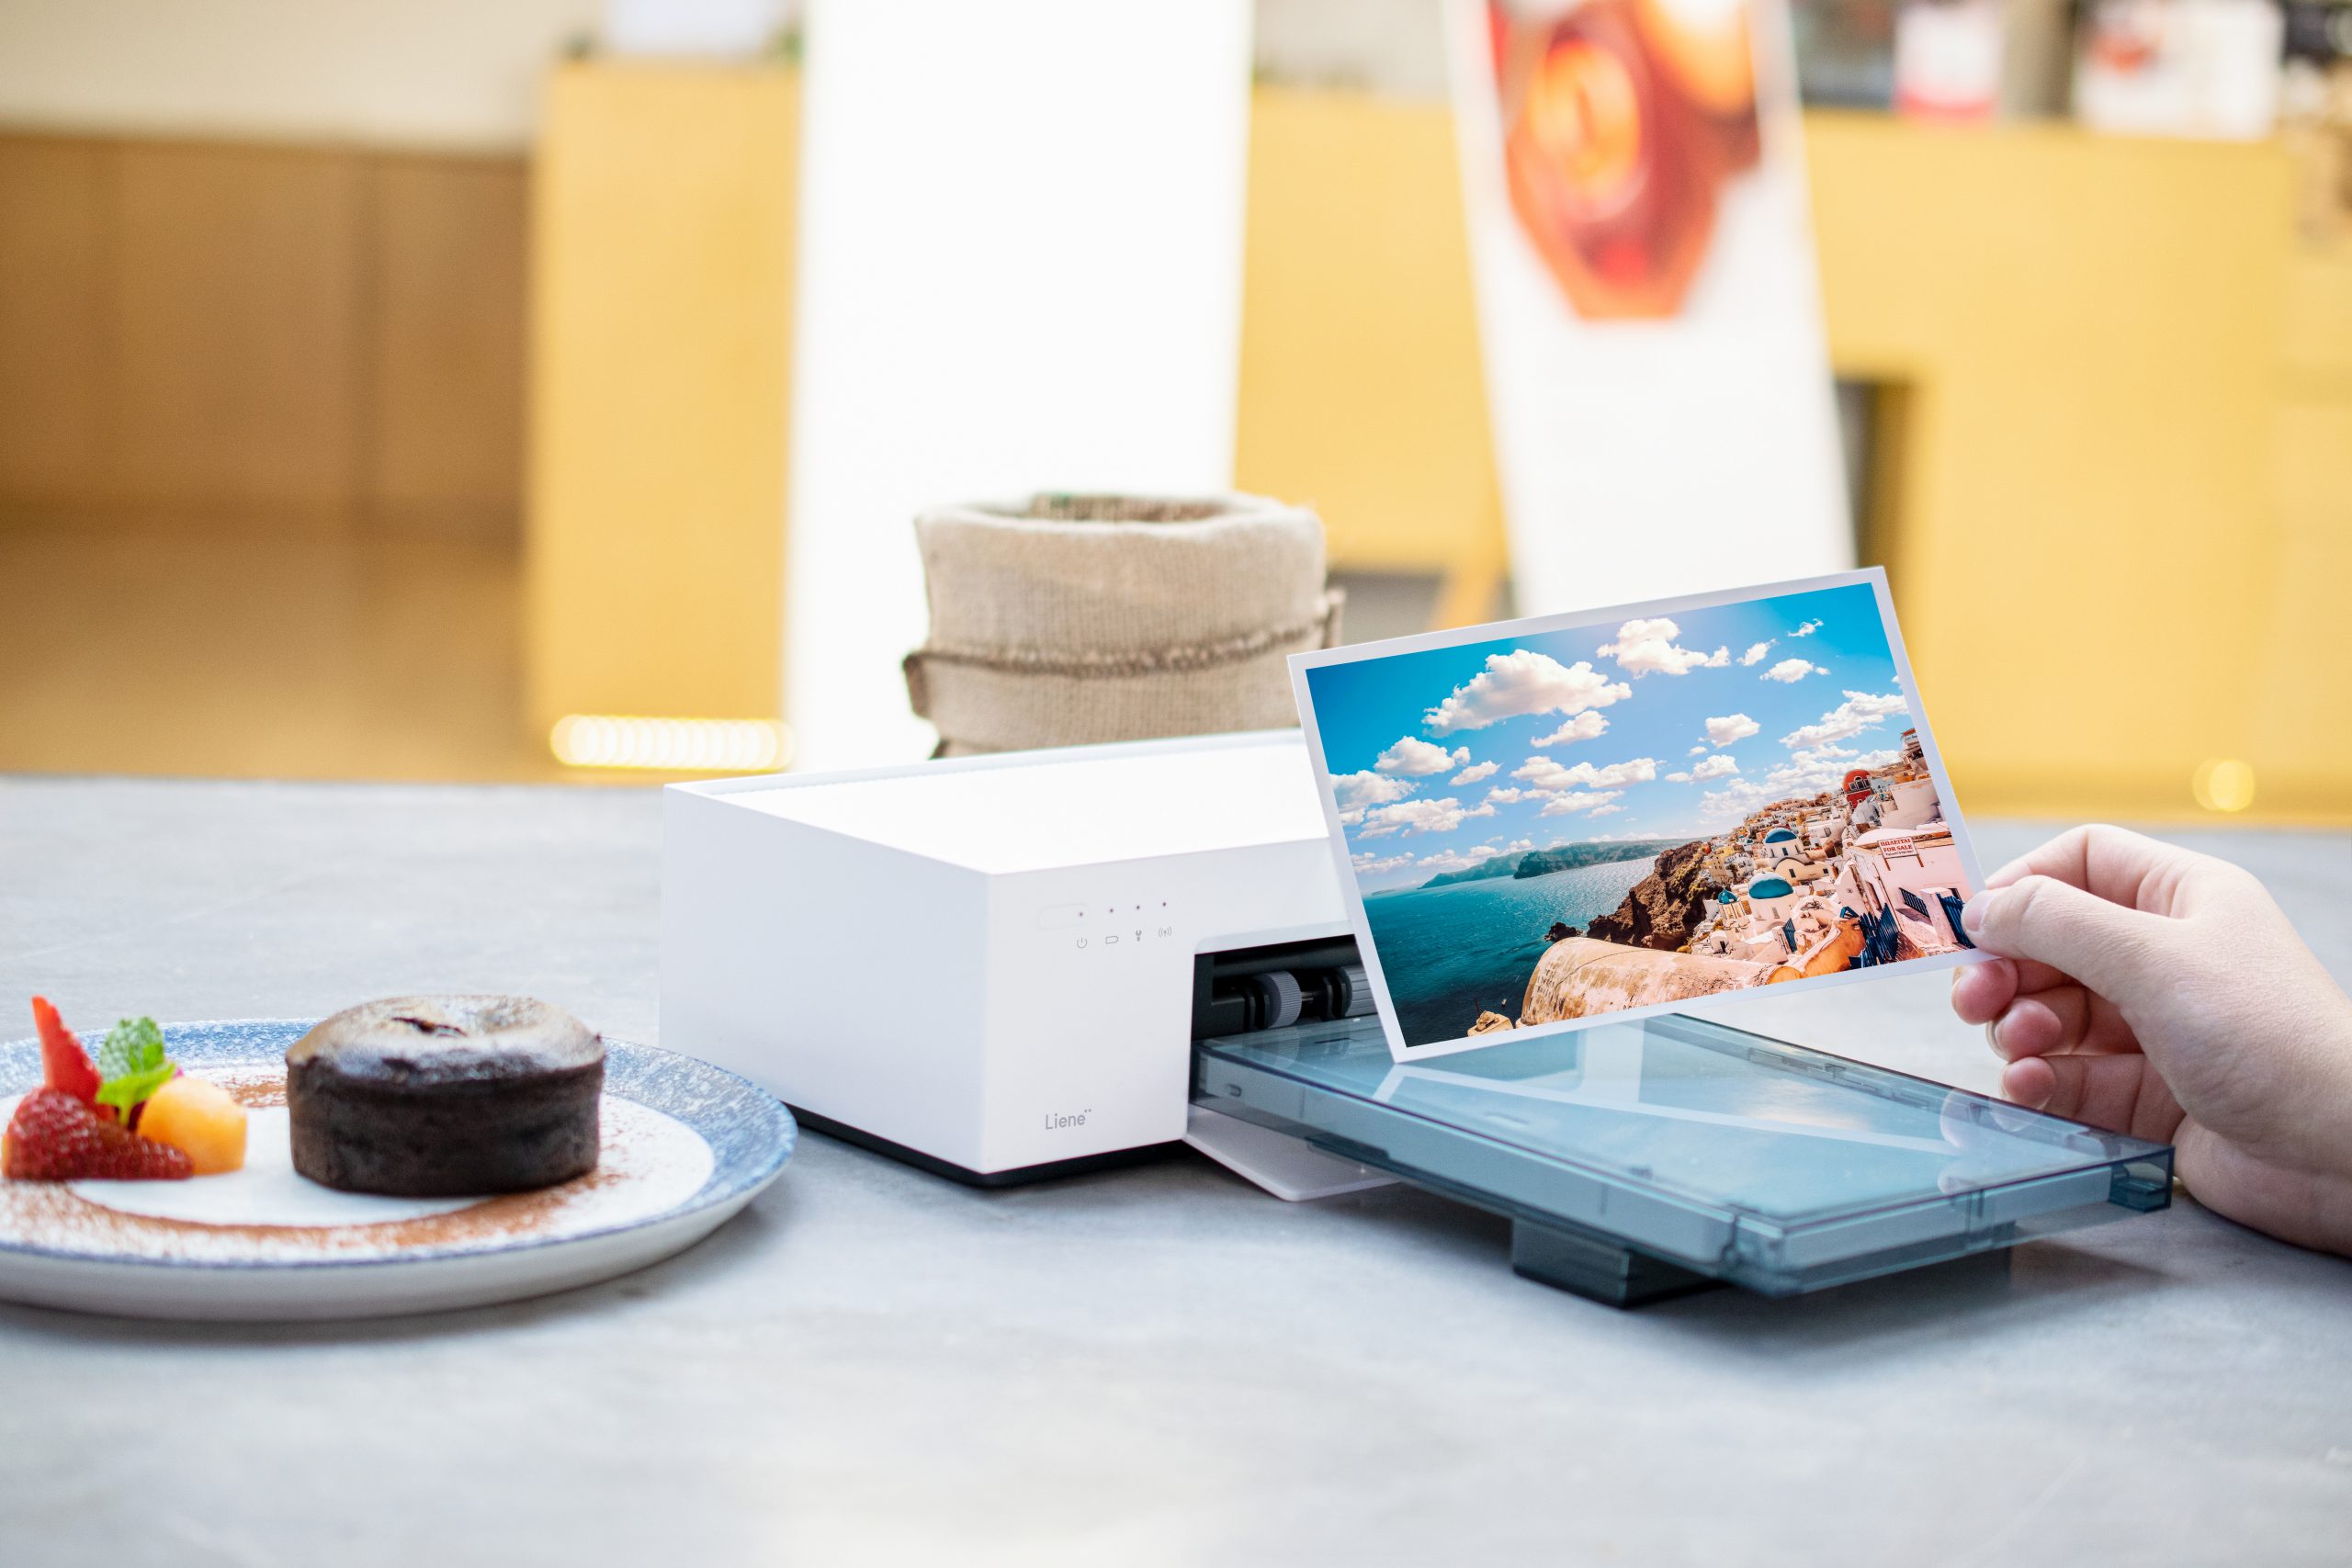 Are Liene’s Instant Photo Printers Fit For Professional Use?